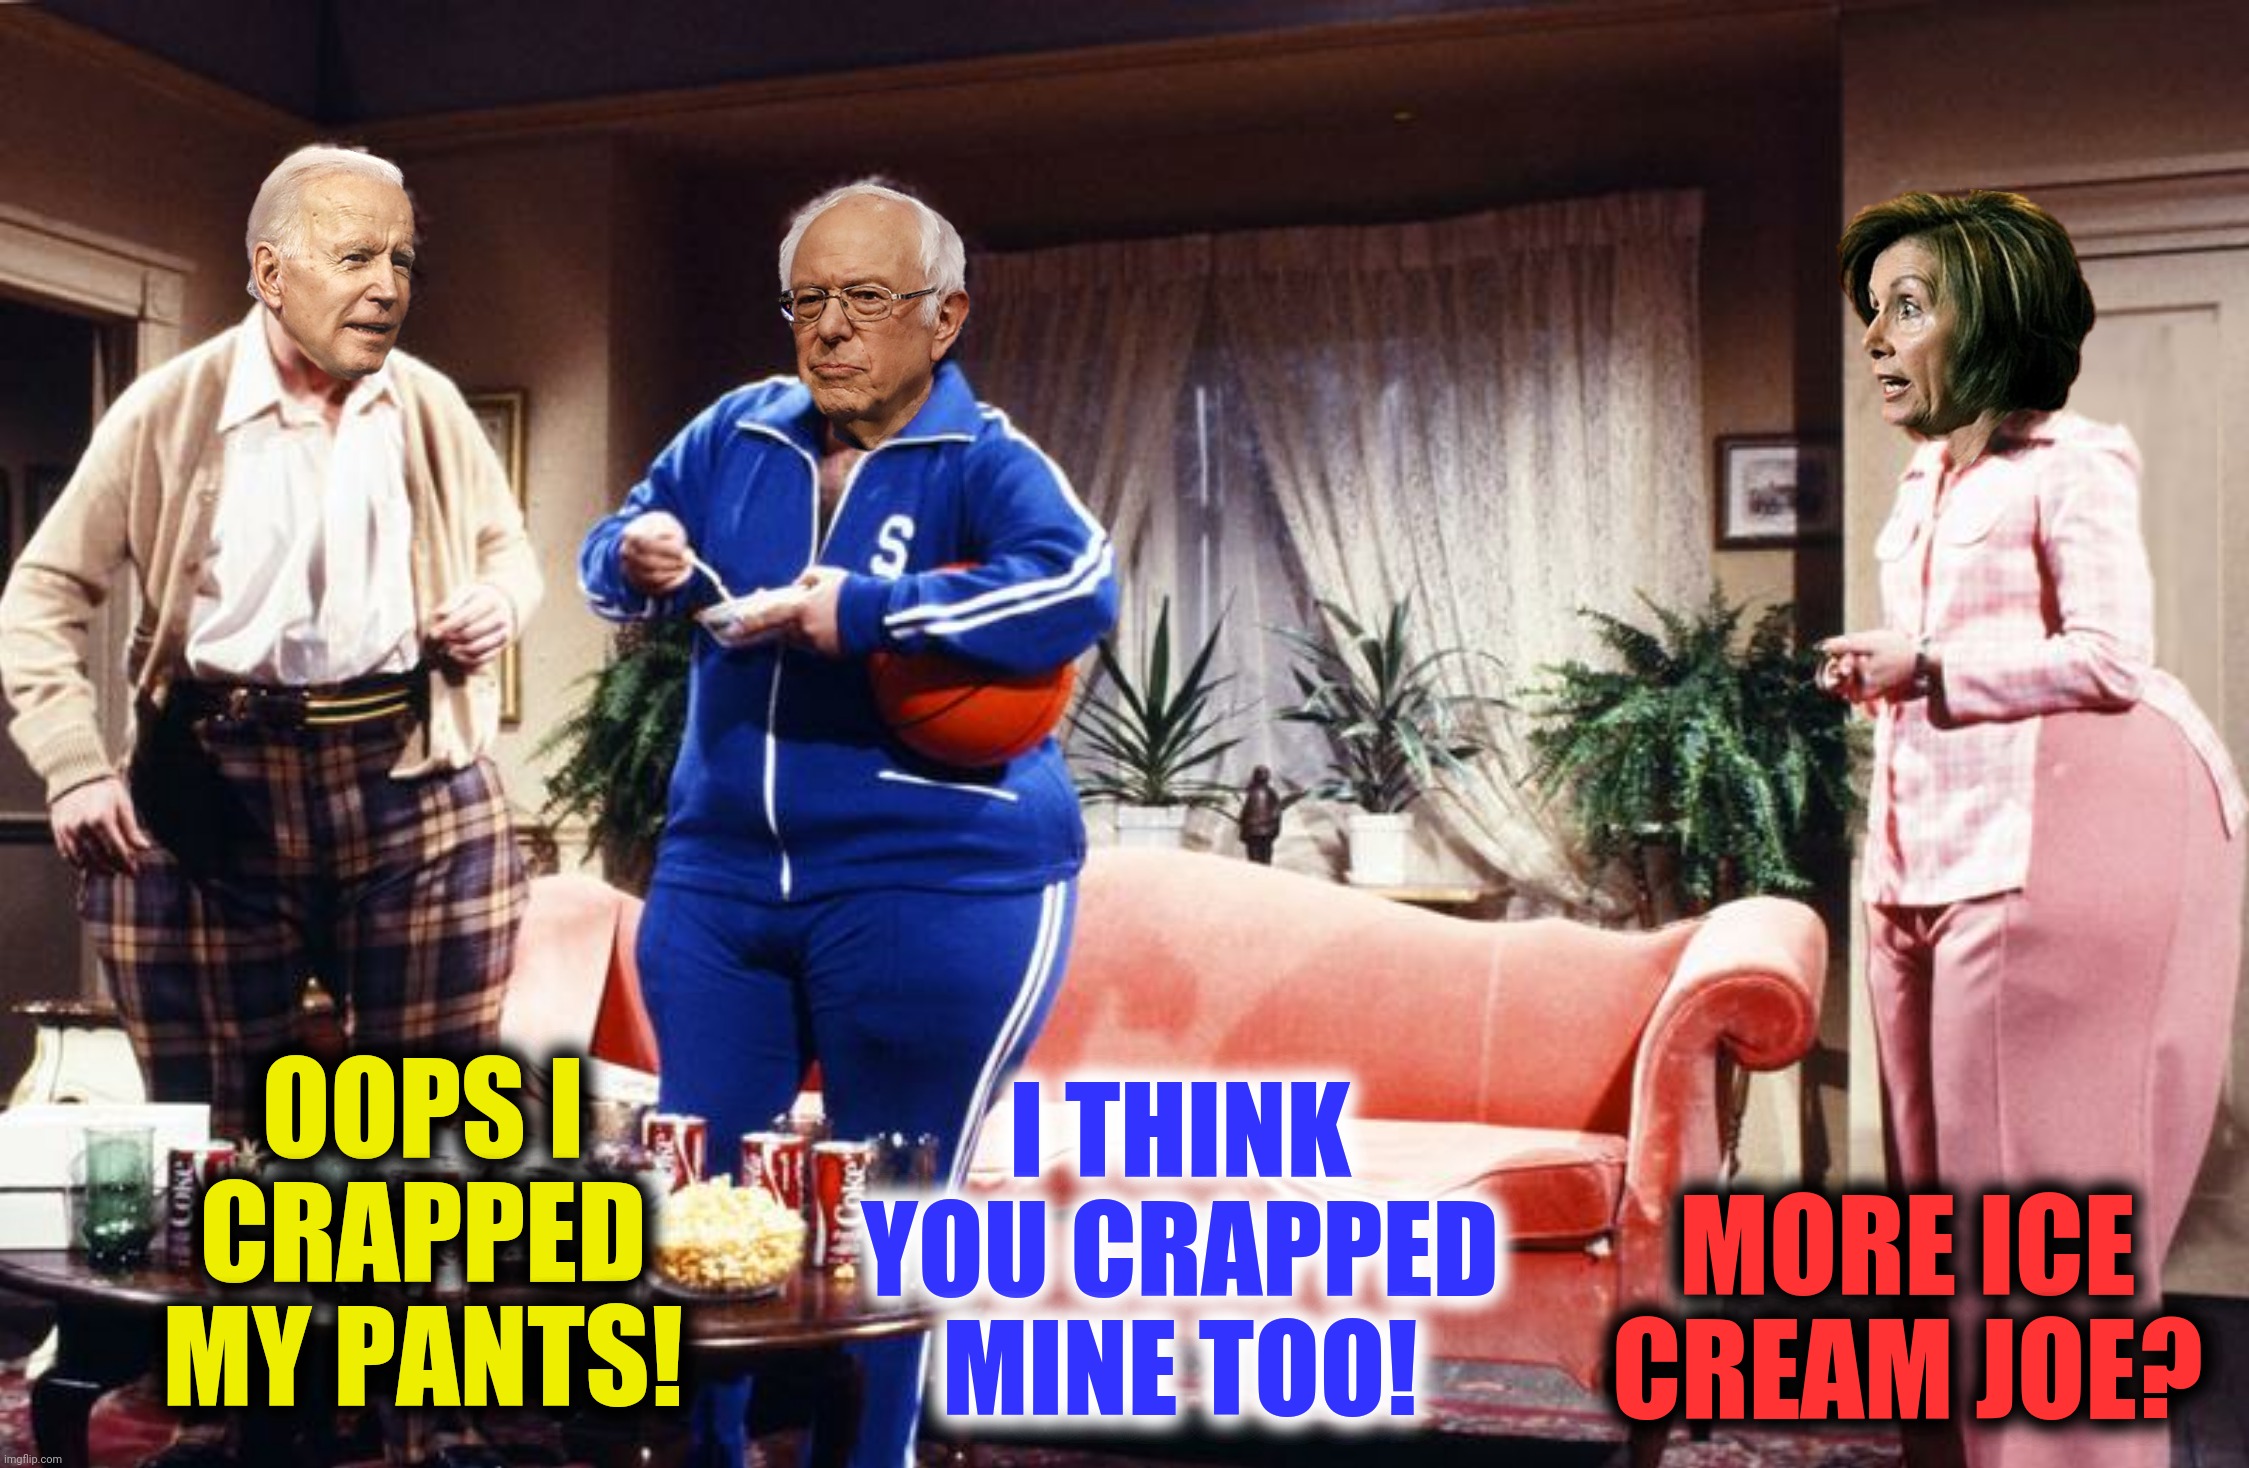 OOPS I CRAPPED MY PANTS! I THINK YOU CRAPPED MINE TOO! MORE ICE CREAM JOE? | made w/ Imgflip meme maker